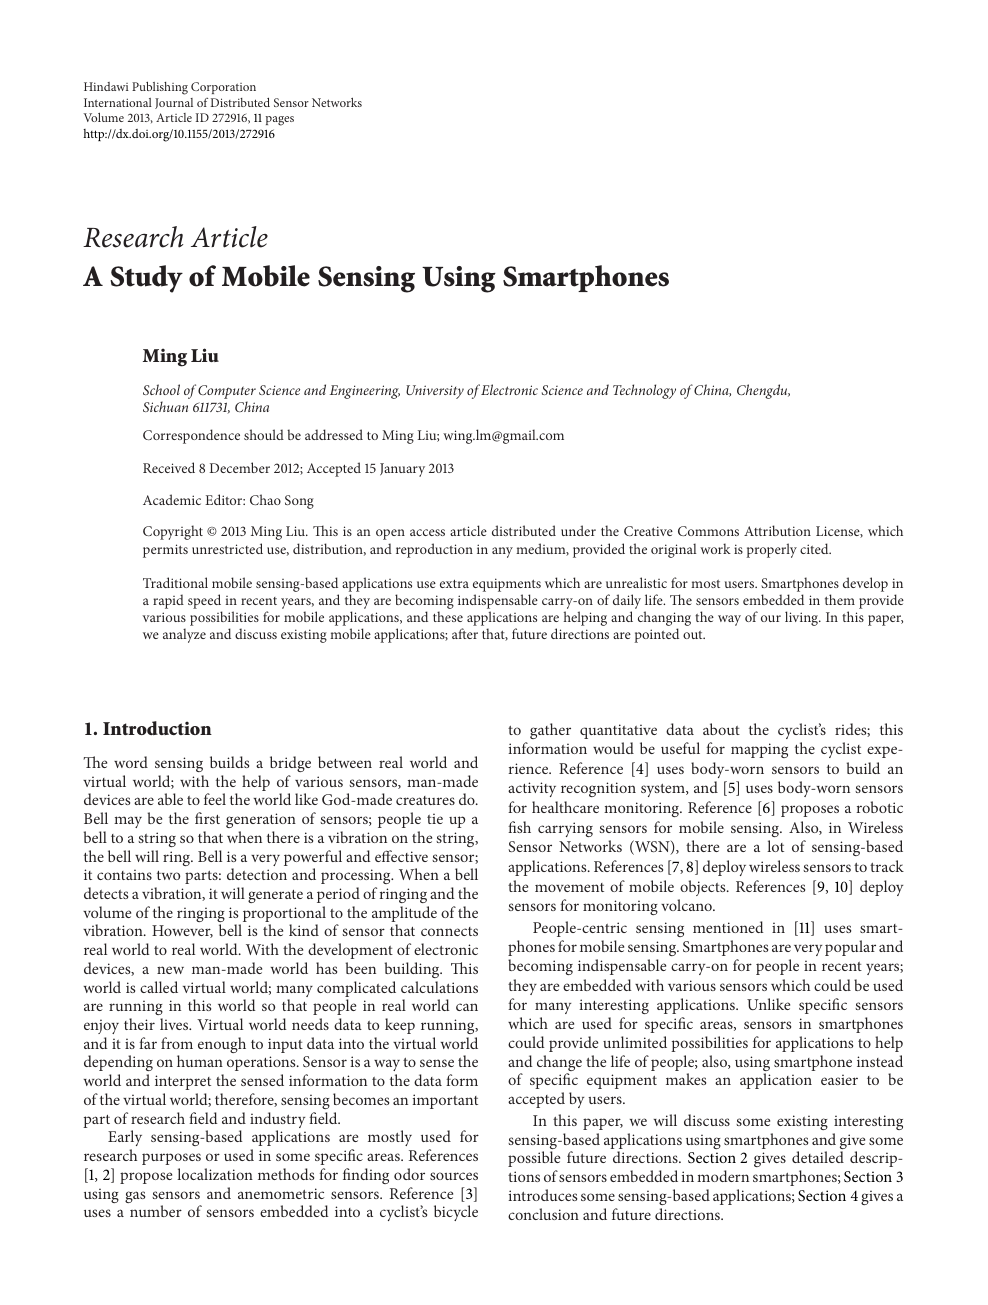 A Study Of Mobile Sensing Using Smartphones Topic Of Research